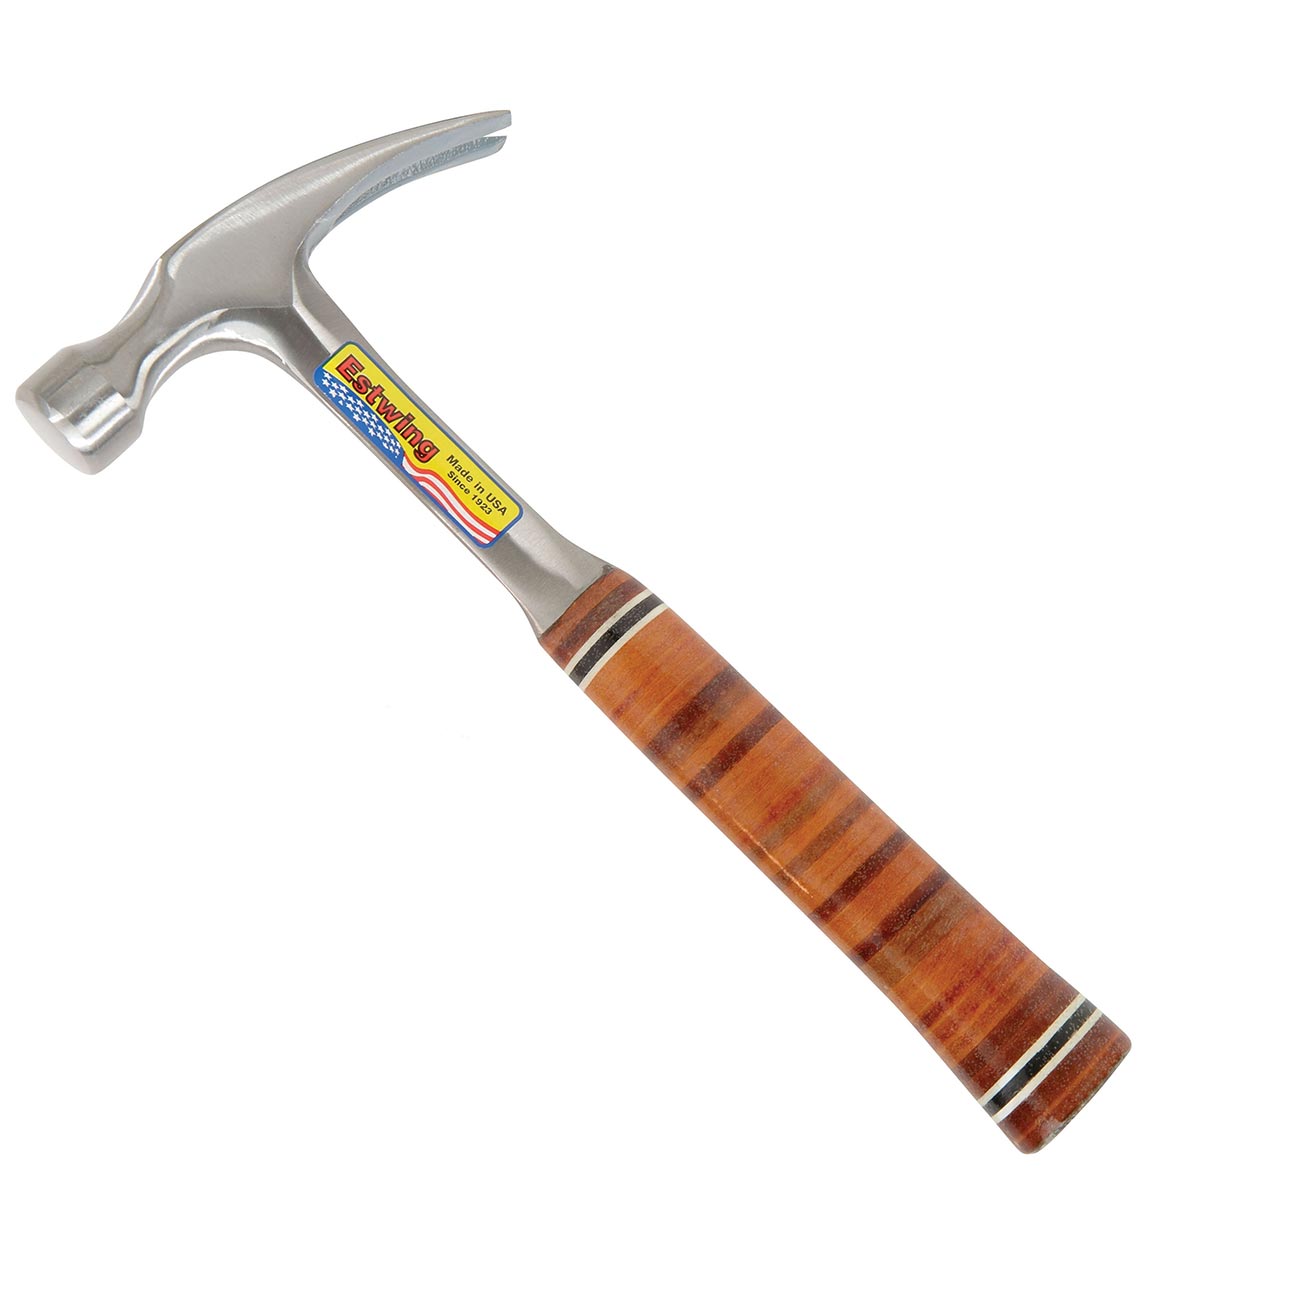 Estwing 16 oz. Smooth Face Rip Hammer - Leather Grip